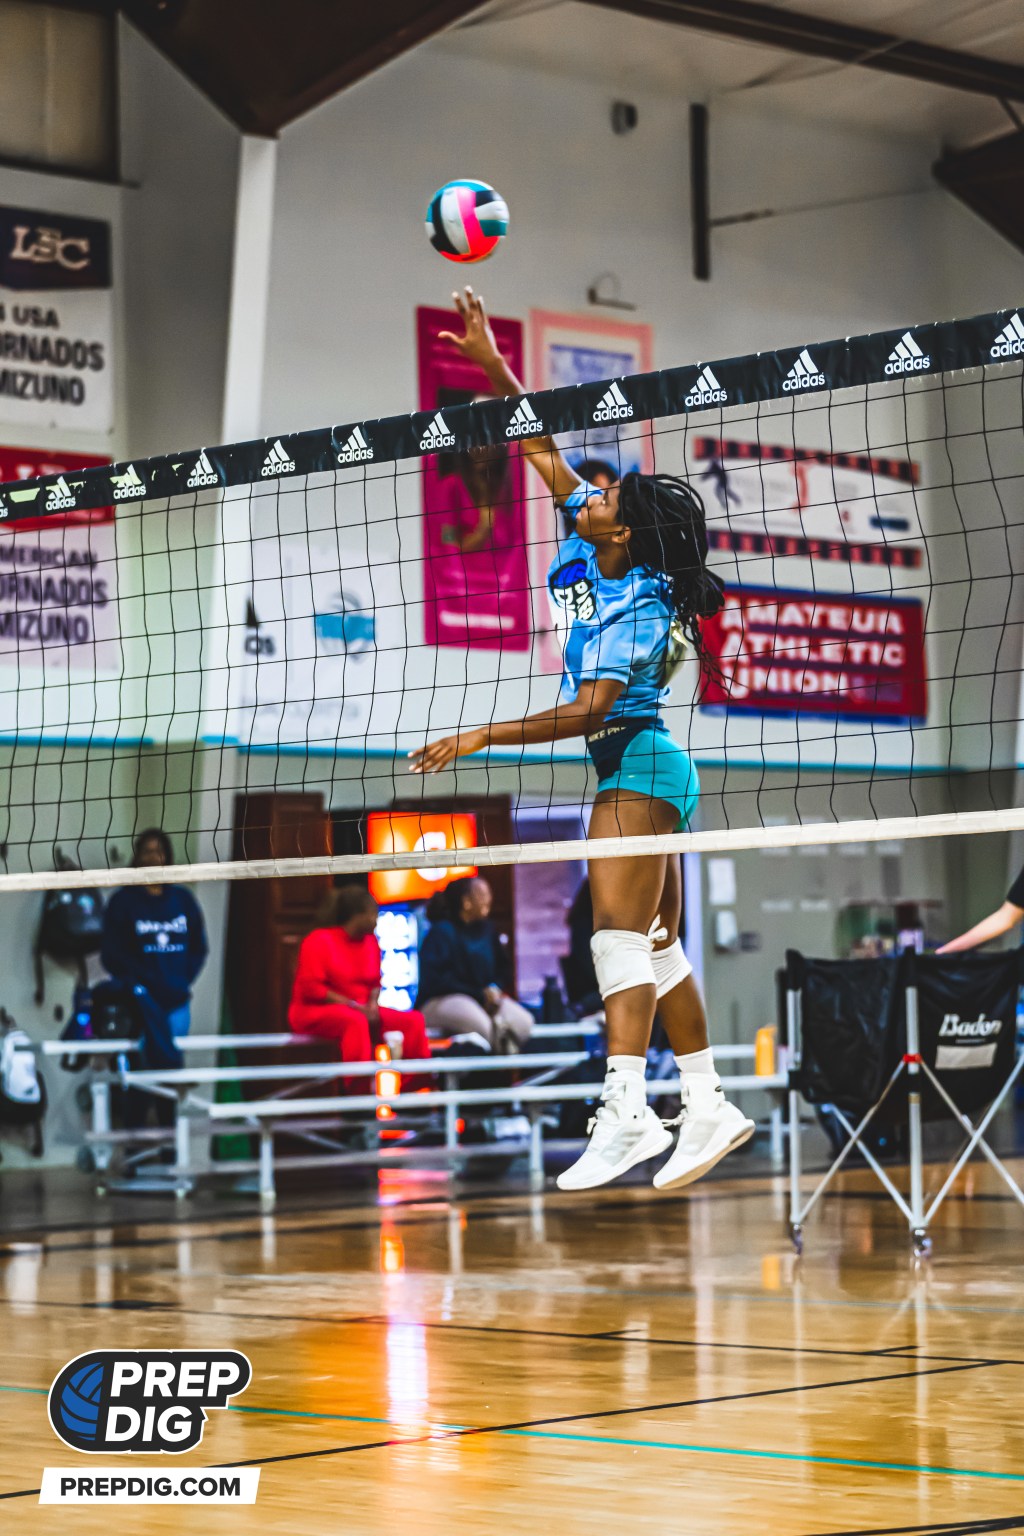 Houston Stop 2 Top 250 Expo Top Performers: Middles